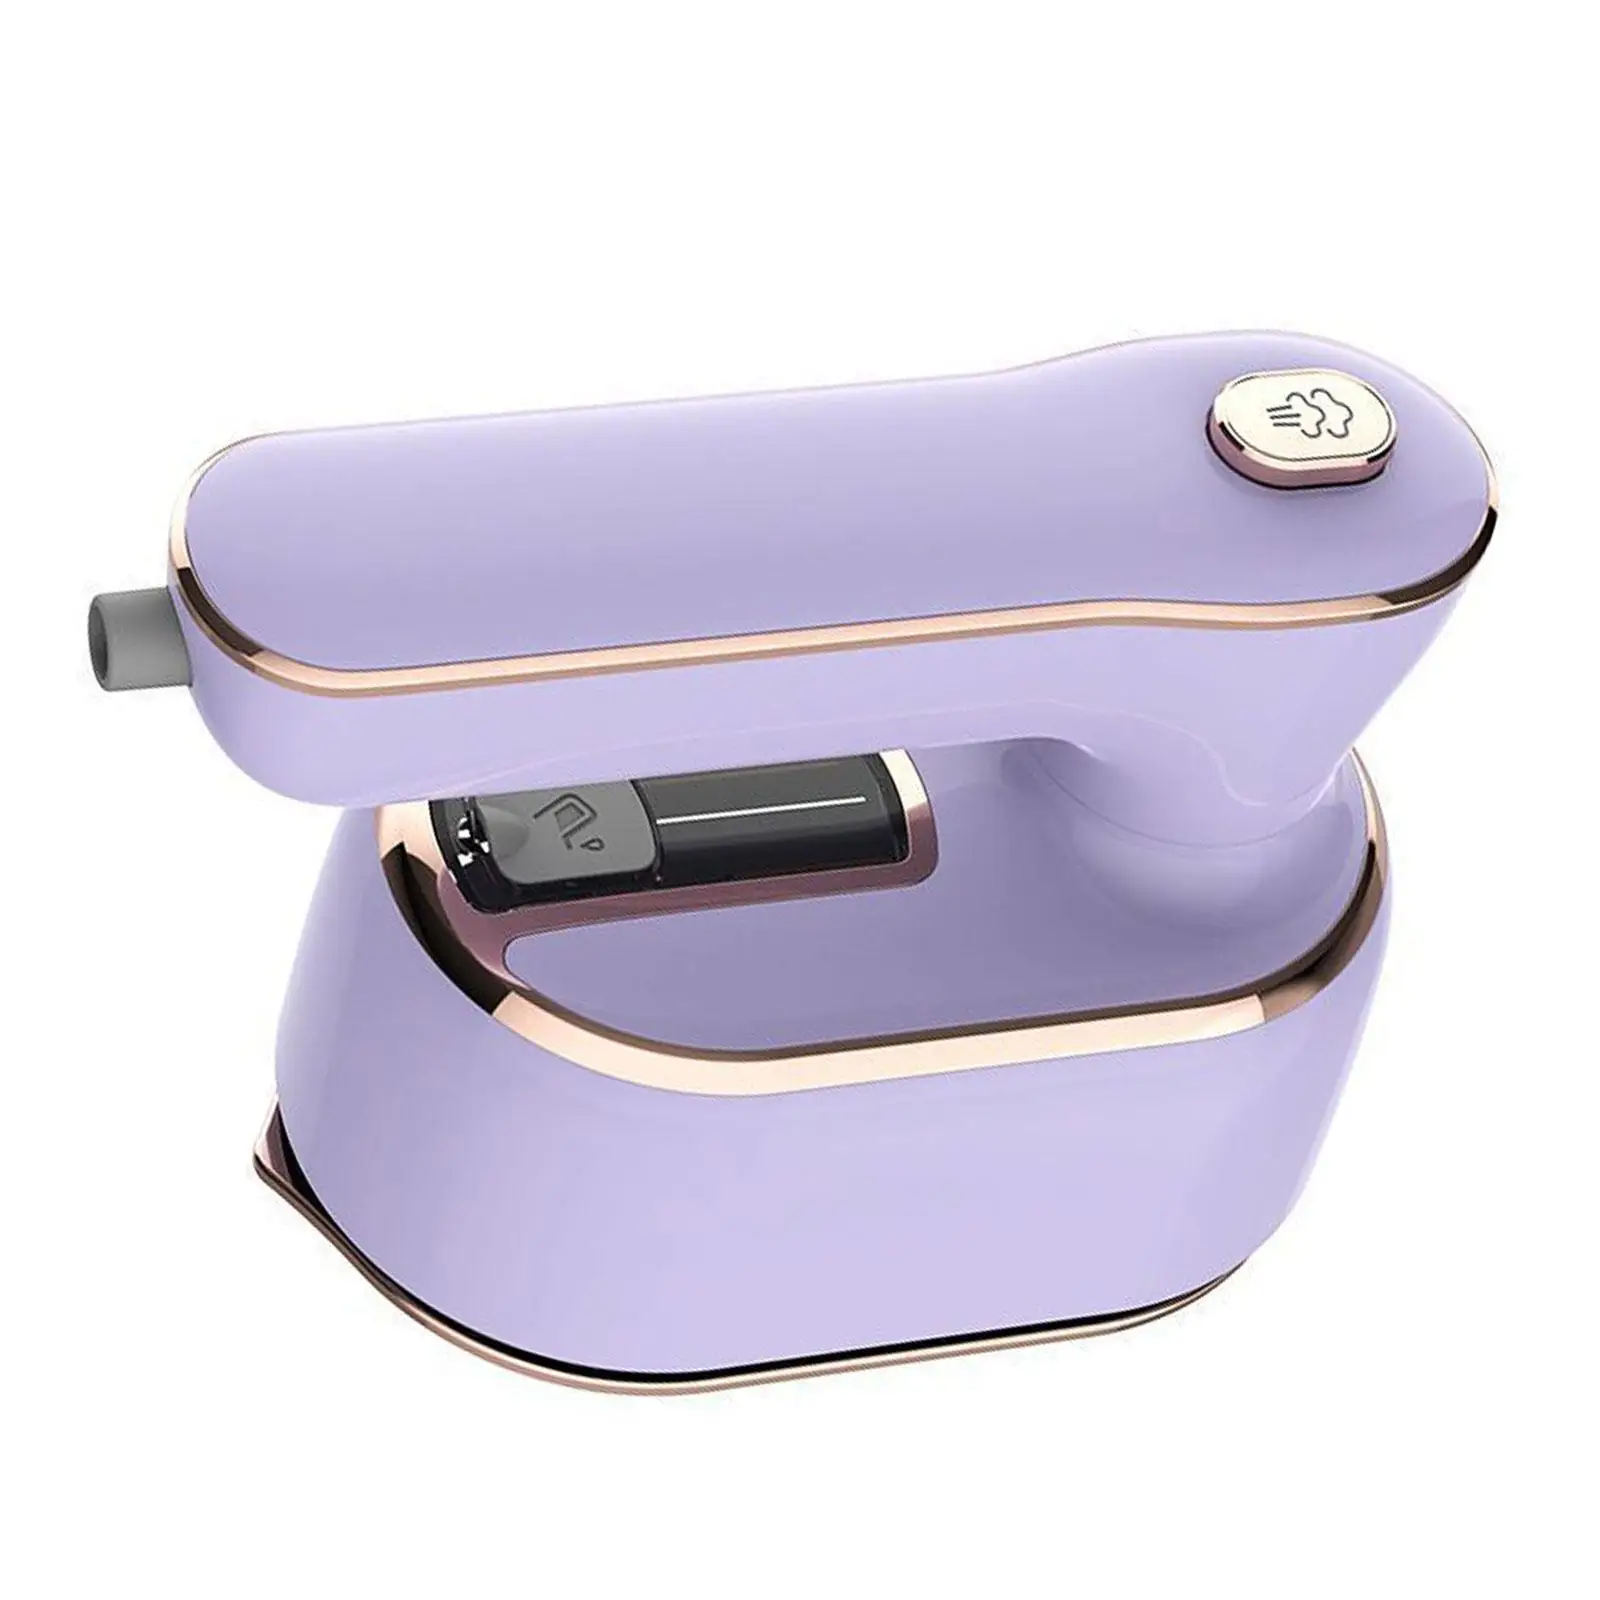 Travel Steamer Iron Portable Mini Steam Iron Folding Clothing Irons Wet and Dry Ironing for College Dorm Hotel Dress